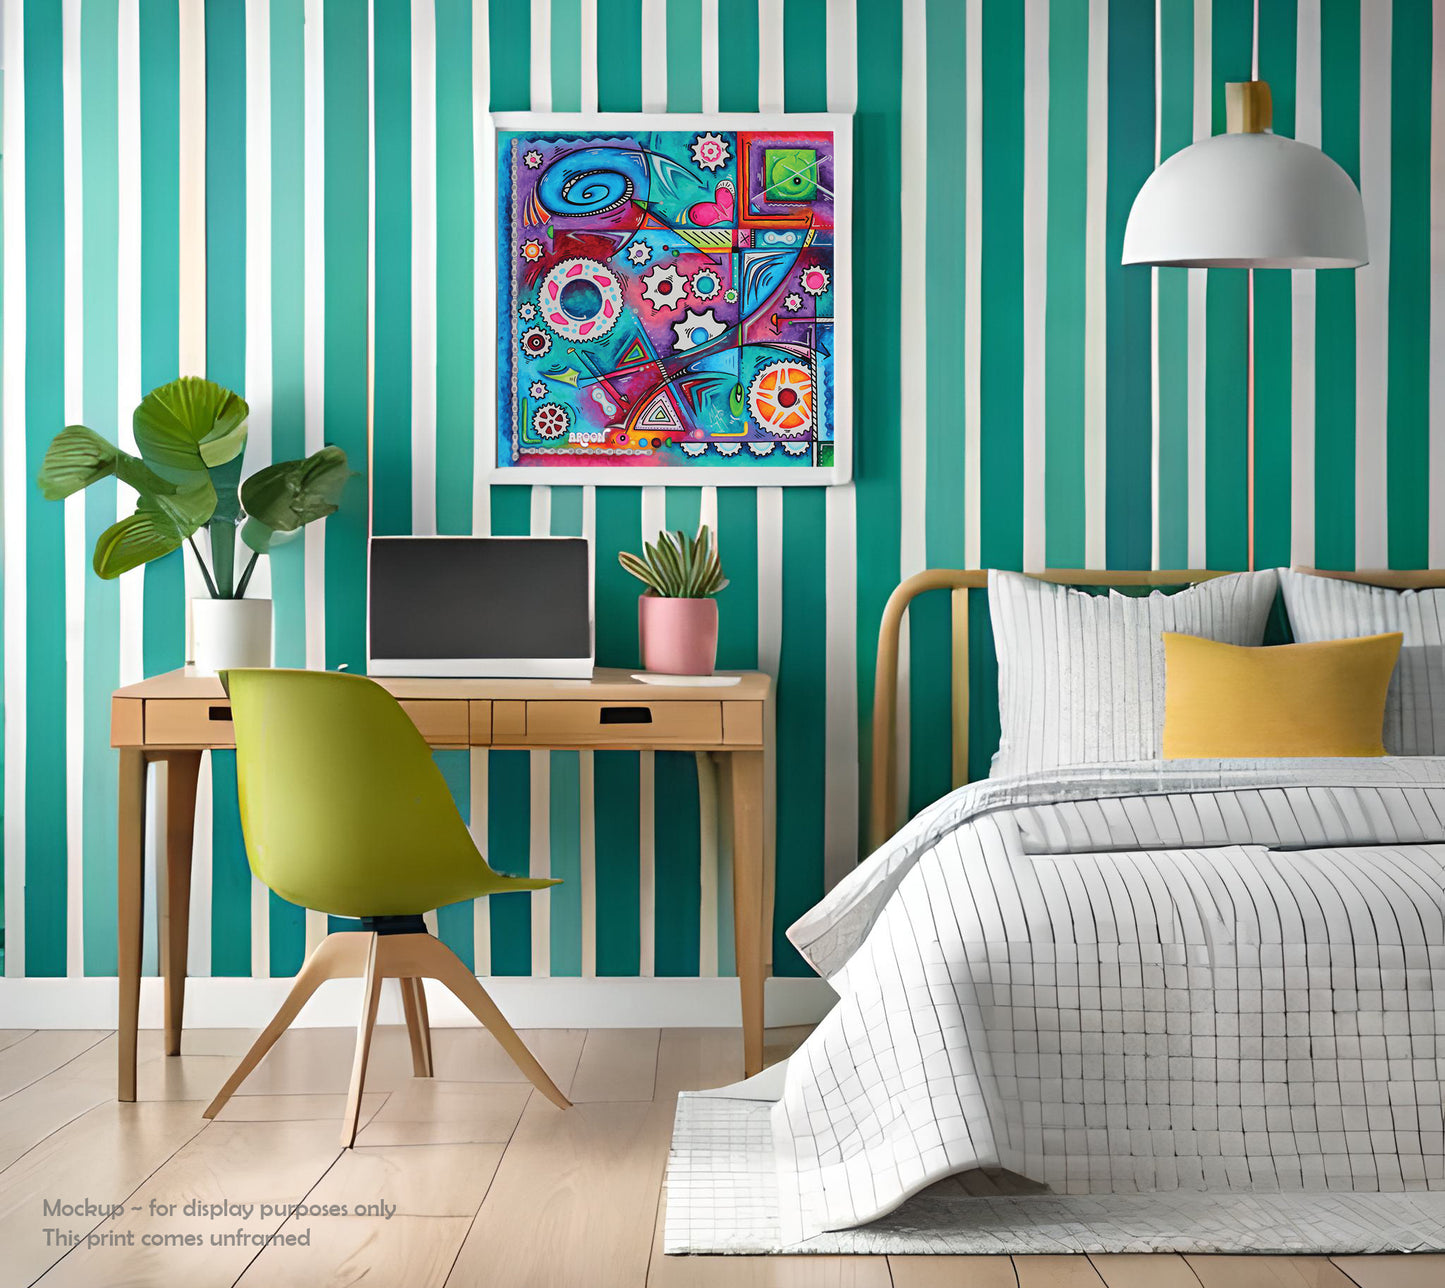 "The Geared Life" Cycling Abstract Gears and Chains Poster Print AROON